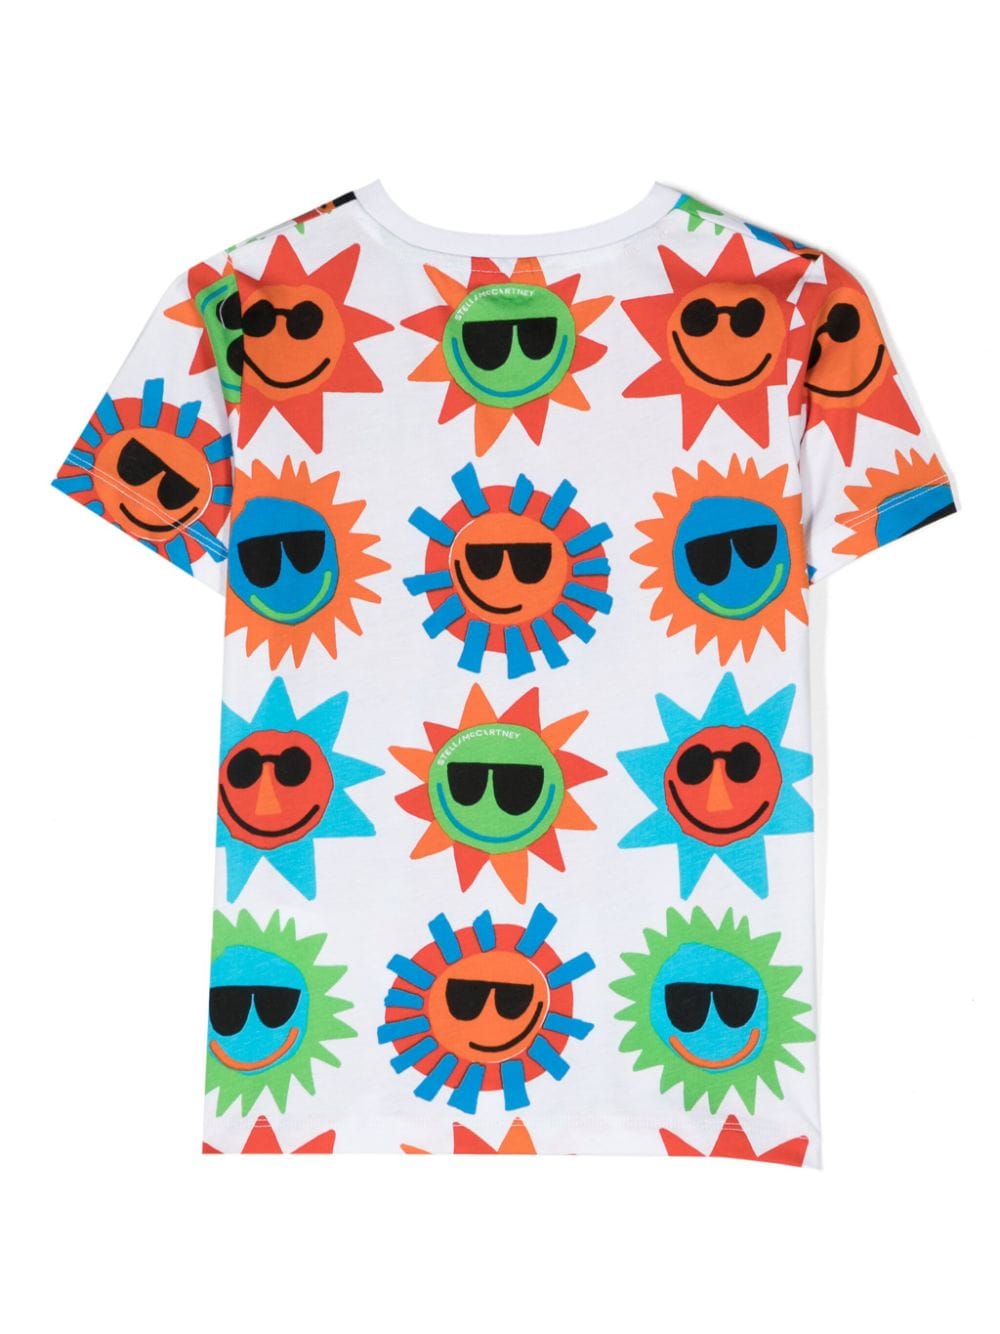 White t-shirt for boys with Sunshine print